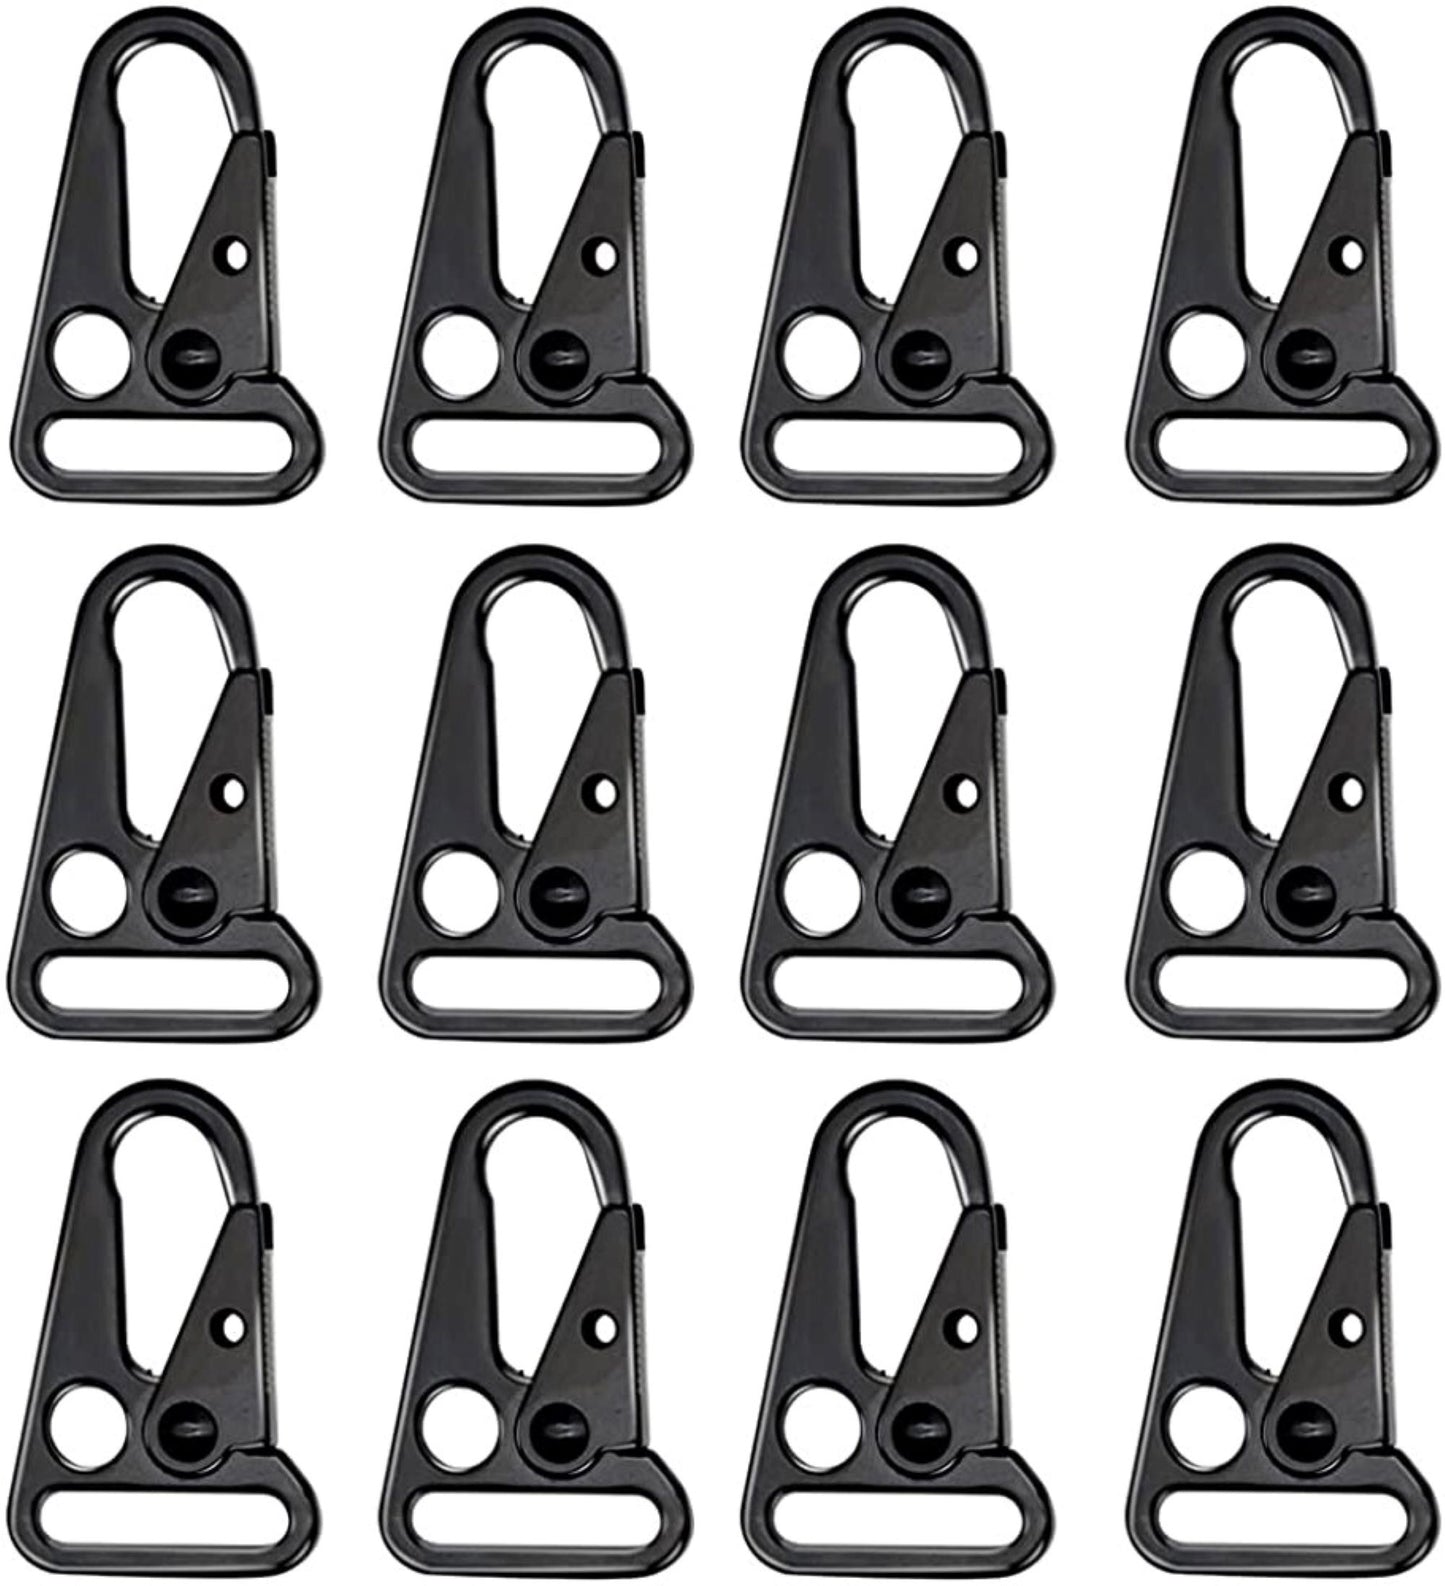 Southern Textiles 1in Heavy Duty HK Snap Hooks Black Metal Clip Hooks Attach Webbing Belt Clip Keychain Rings Carrying Tools 6 Pack